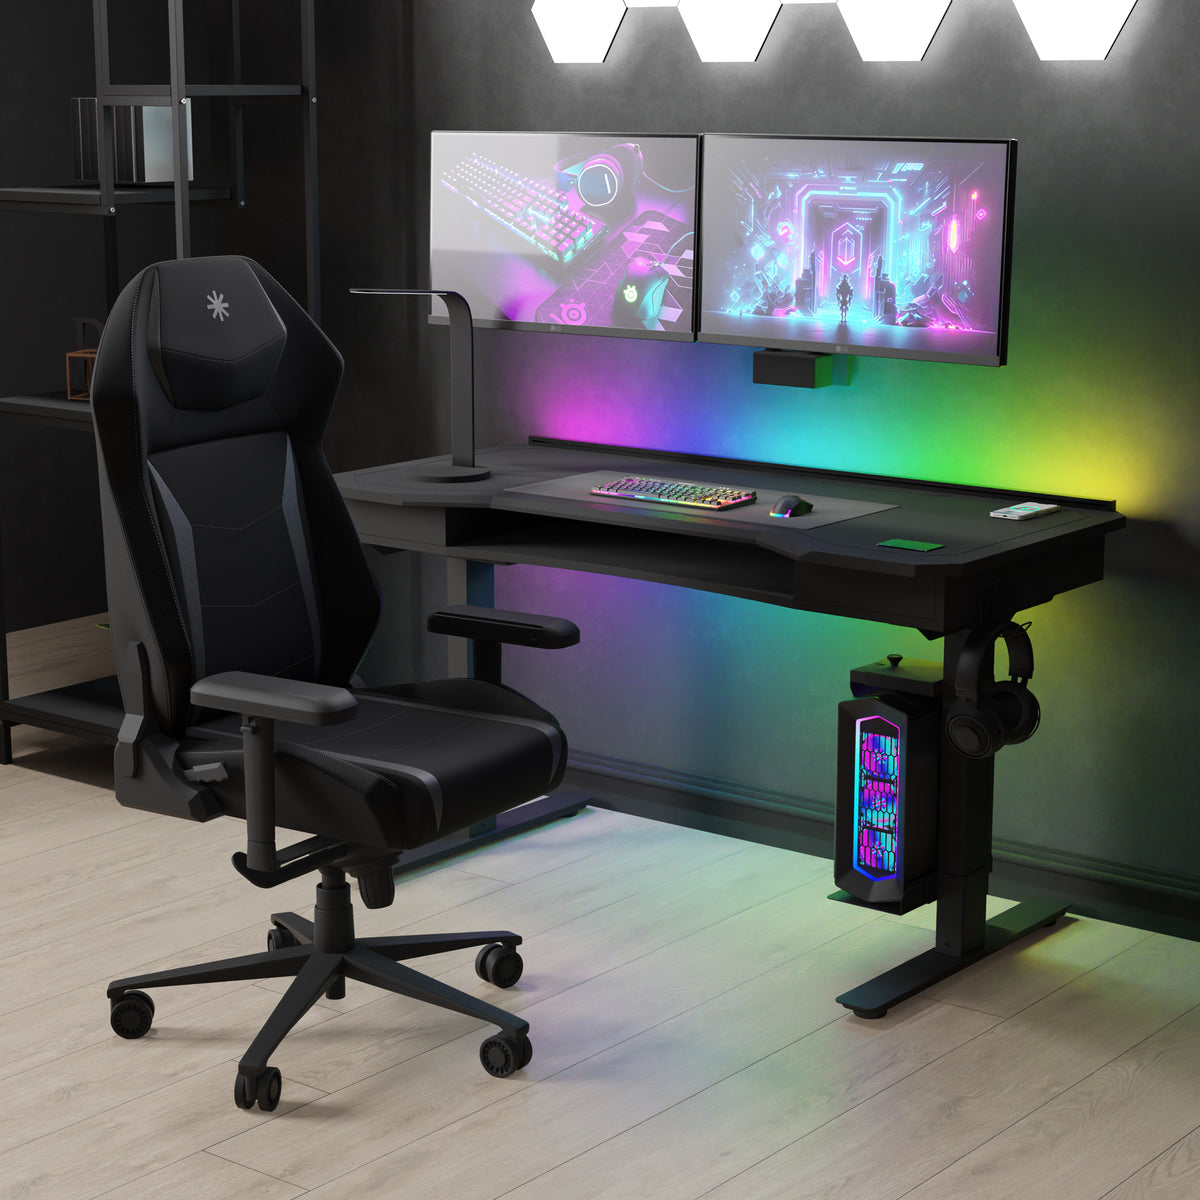 Koble Vortex Gaming Chair with Grey Accents for home office or bedroom